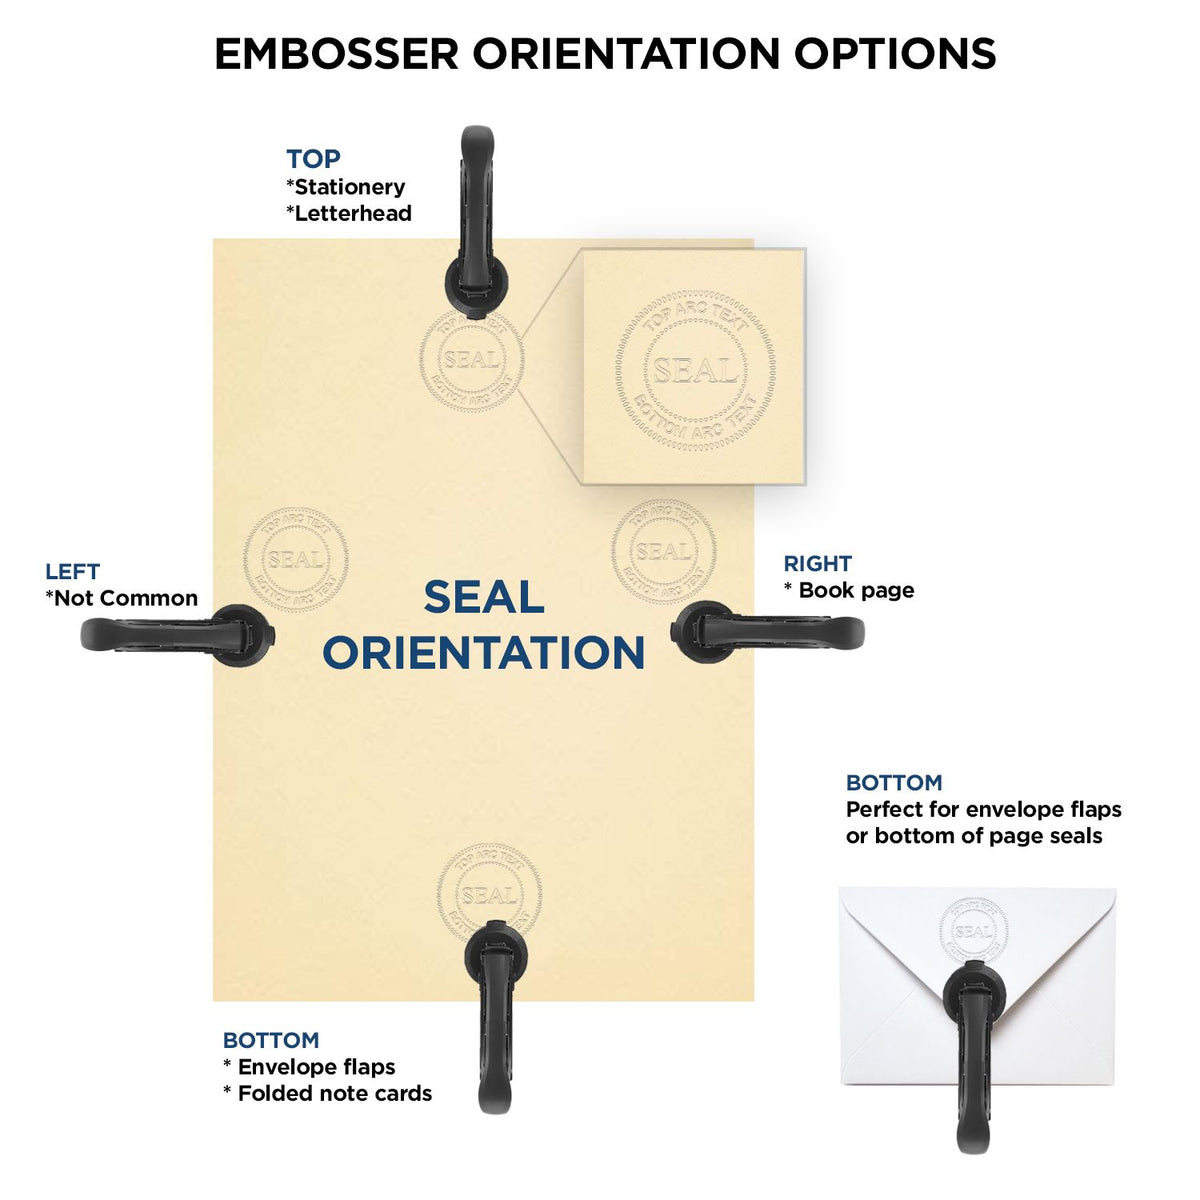 An infographic for the State of New York Long Reach Architectural Embossing Seal showing embosser orientation, this is showing examples of a top, bottom, right and left insert.